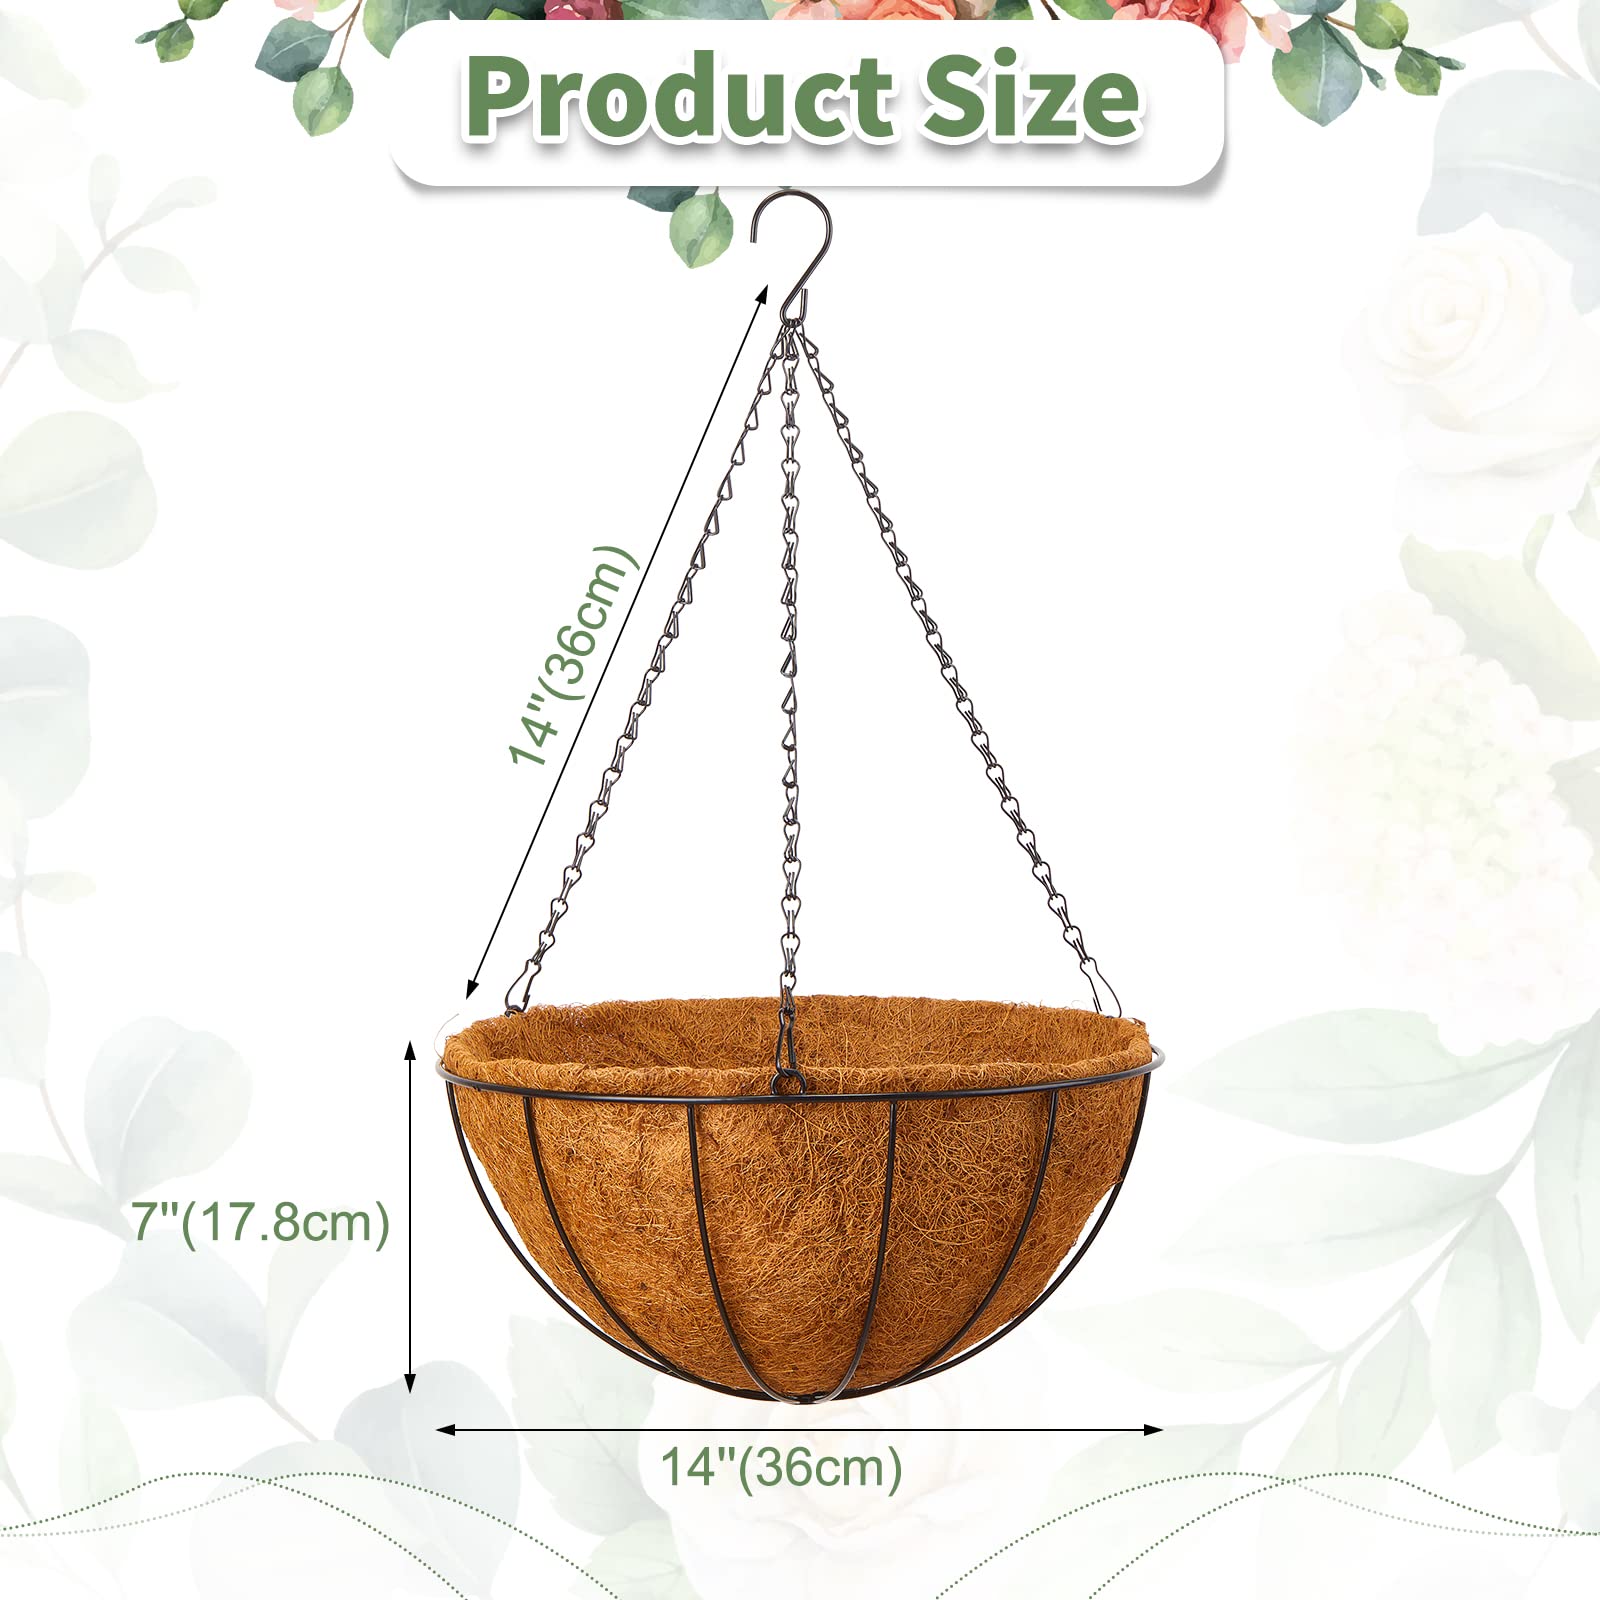 Mimorou 8 Pack Hanging Planters 14 Inch Metal Flower Pots Basket Holder with Coconut Coir Liners Metal Round Wire Plant Holder with Chain Porch Decor for Indoor Outdoor Patio Porch Garden Decoration